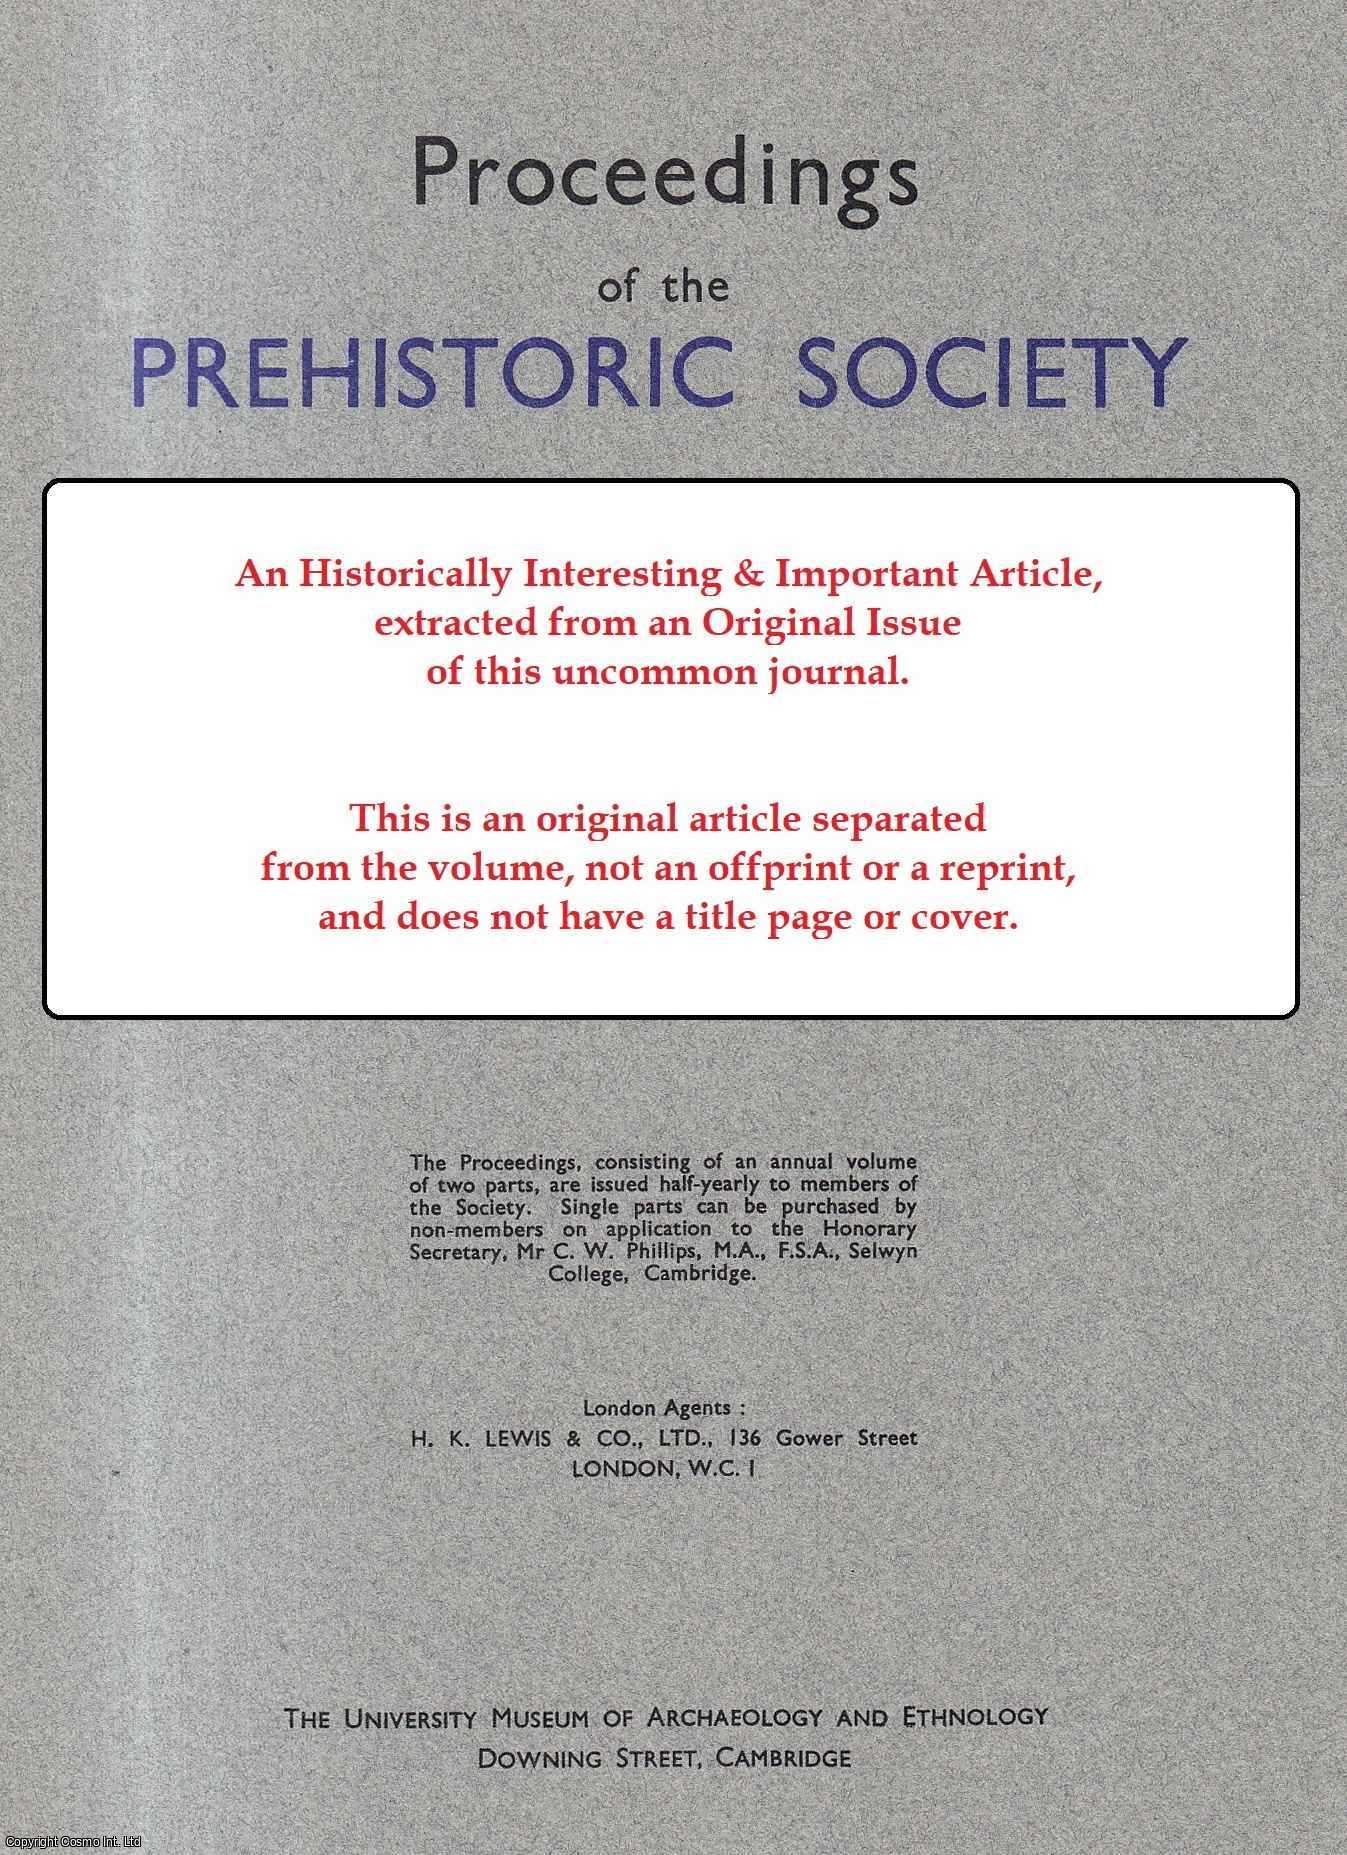 E. S. Higgs - Part II. The Climate, Environment and Industries of Stone Age Greece. An original article from Proceedings of the Prehistoric Society, 1966.